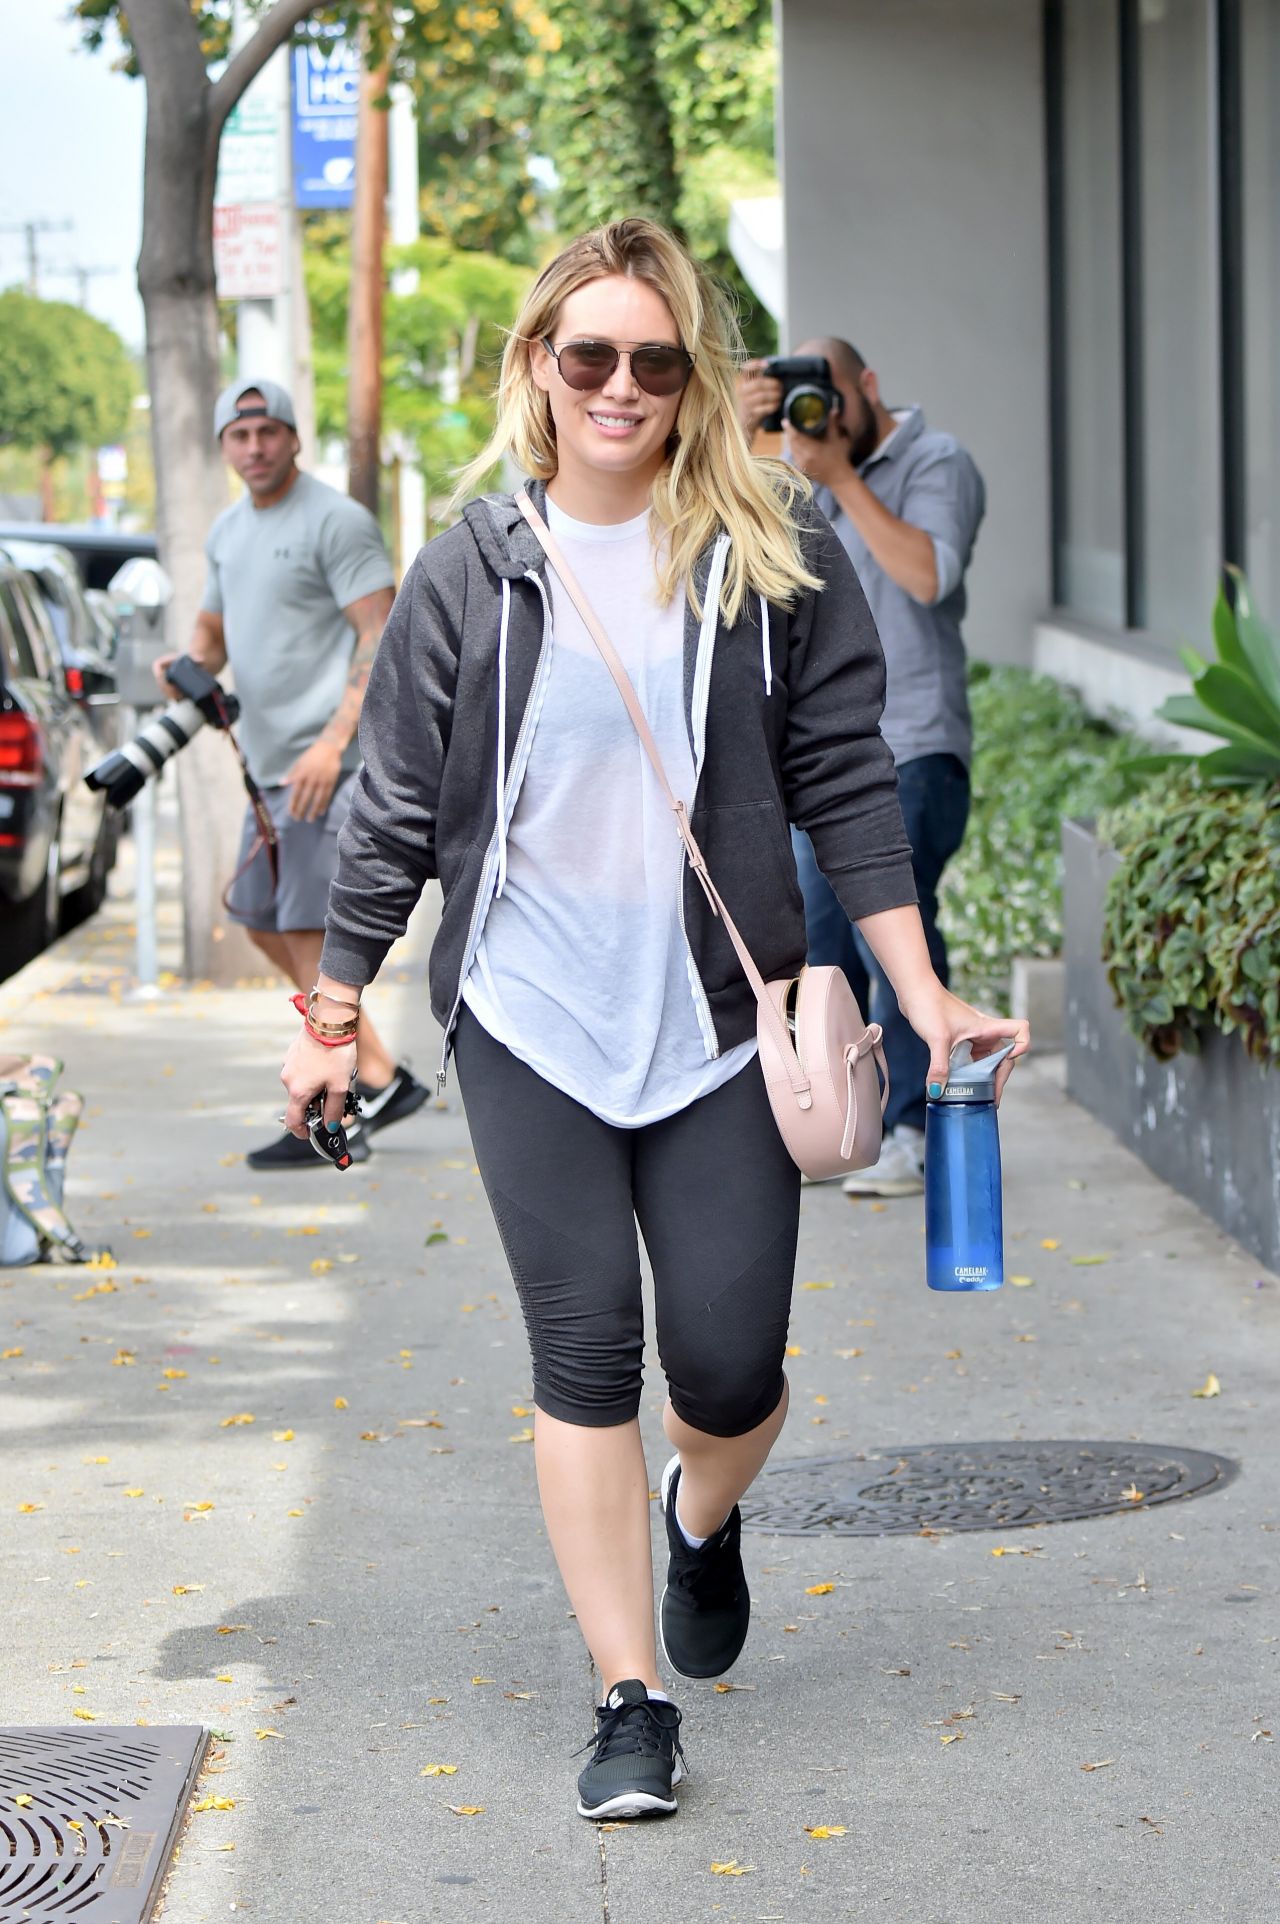 Hilary Duff West Hollywood October 2, 2016 – Star Style